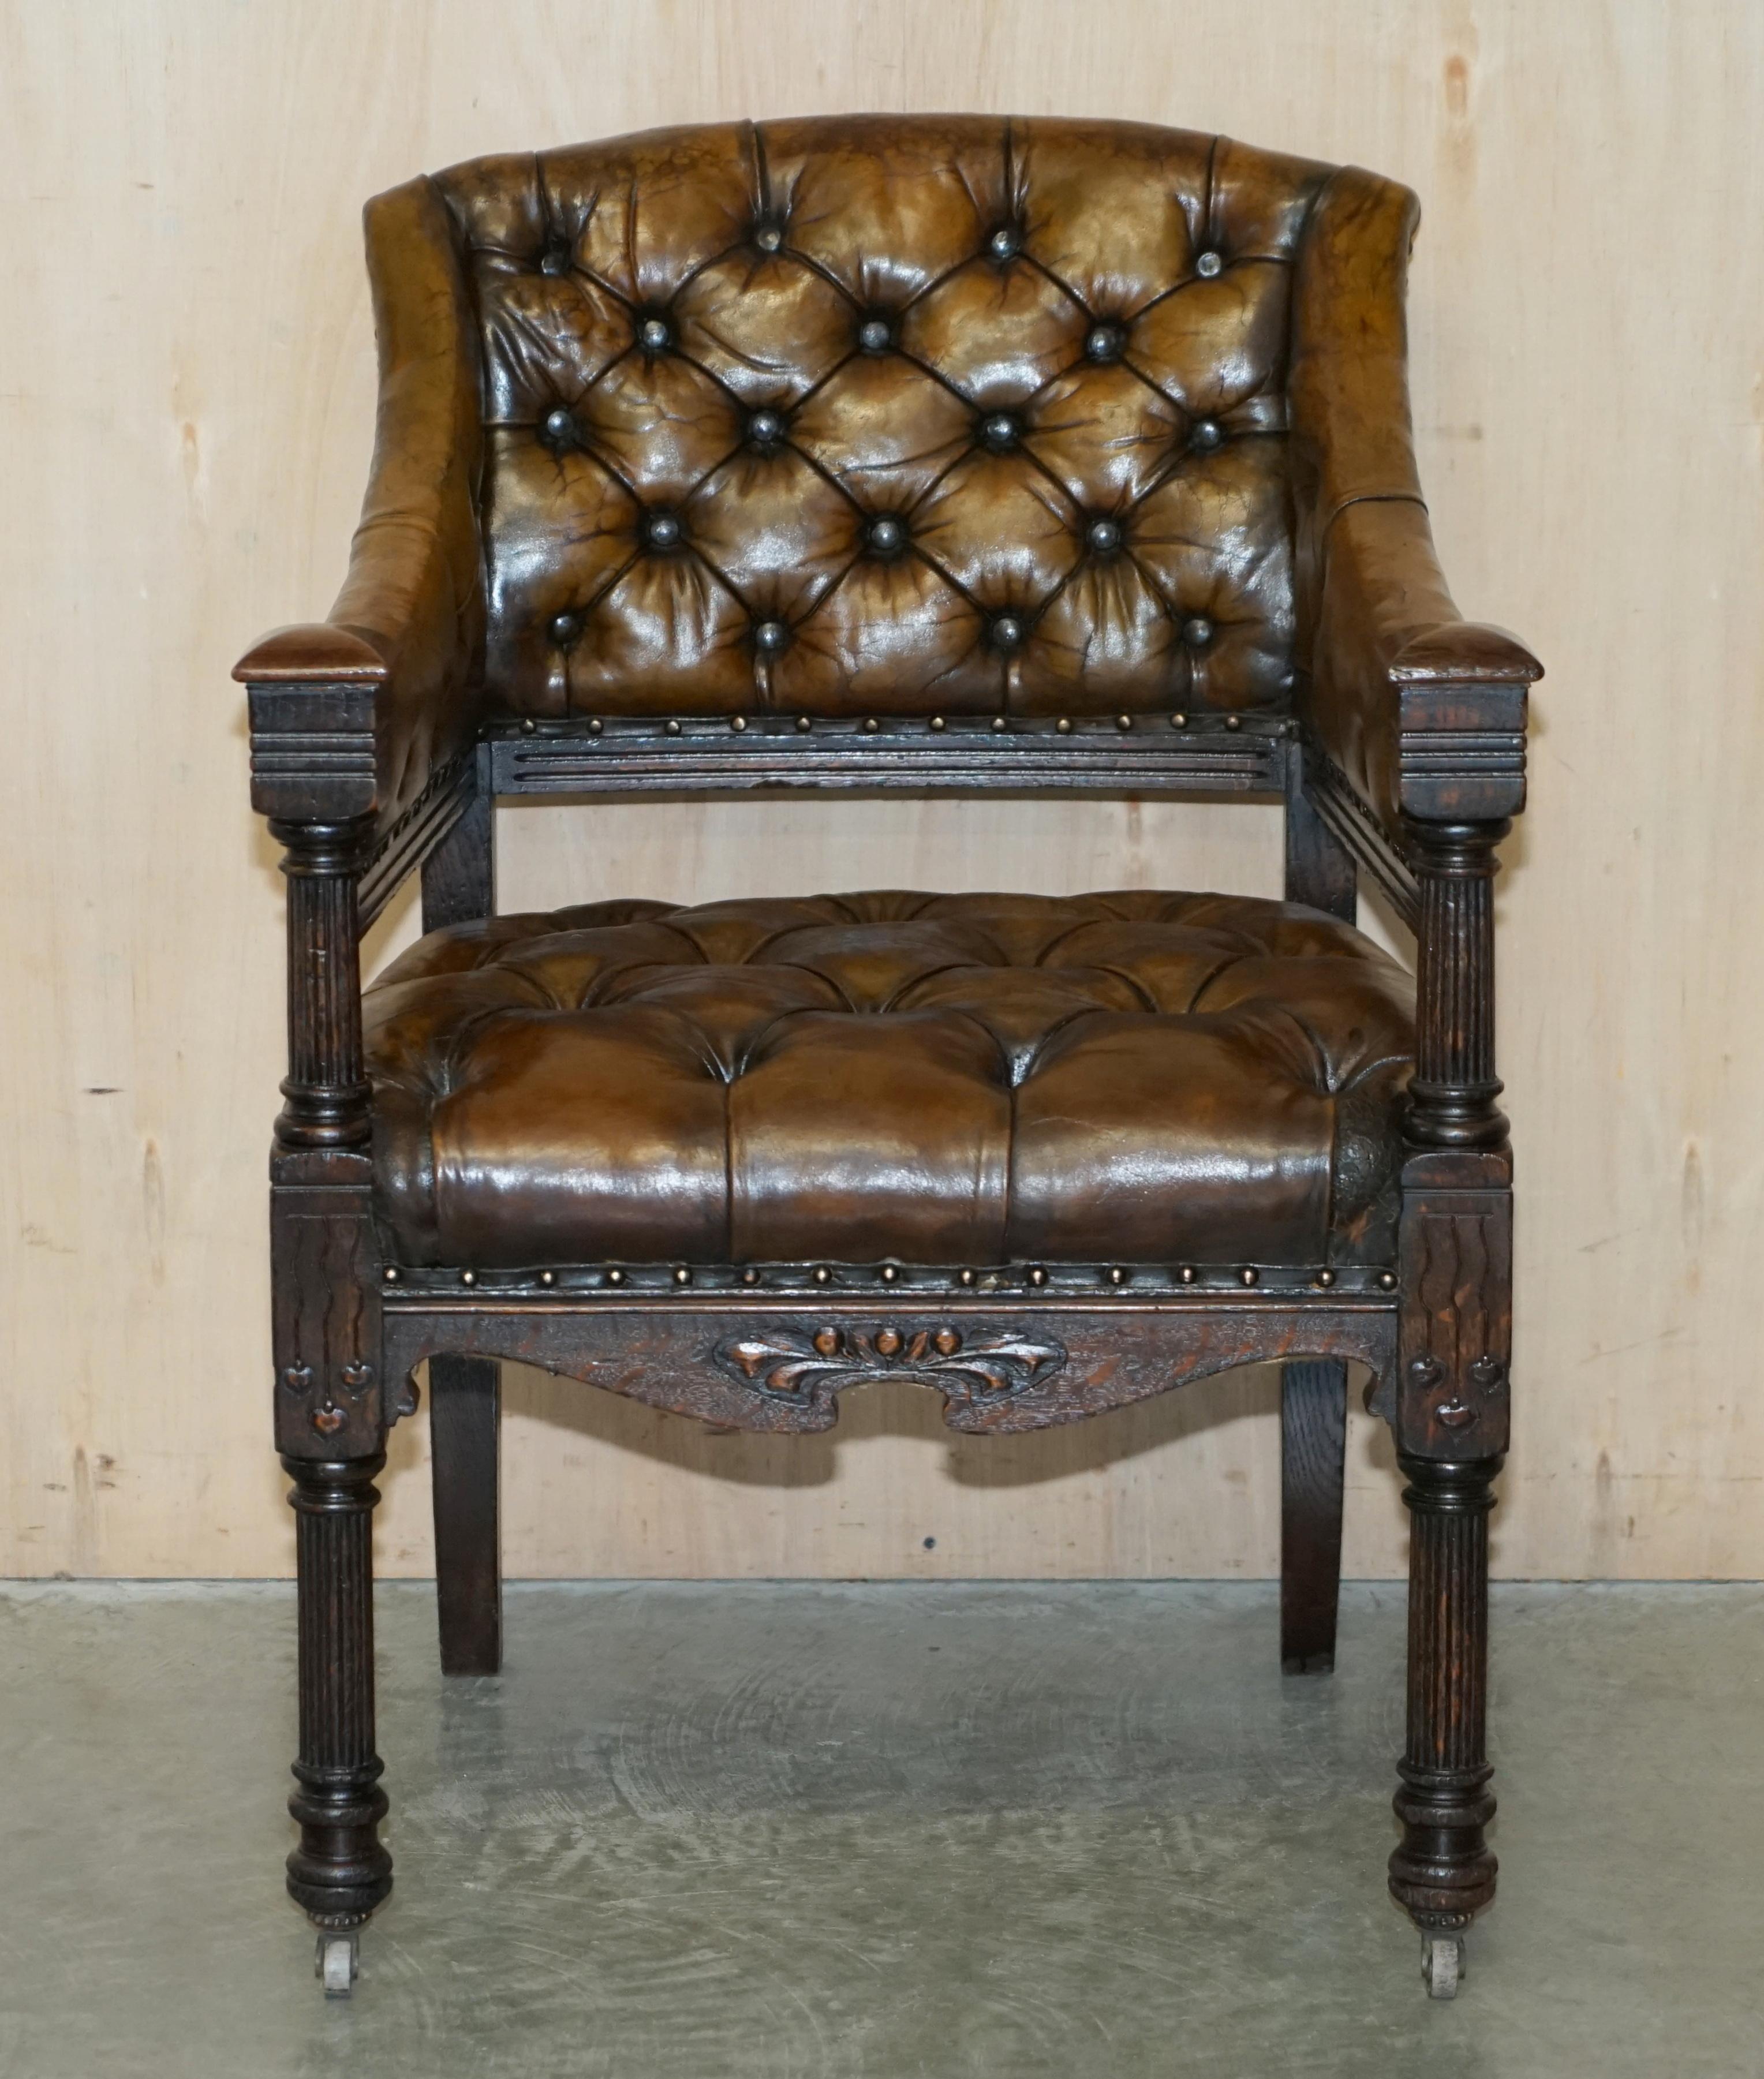 Royal House Antiques

Royal House Antiques is delighted to offer for sale this very rare and highly collectable, fully restored circa 1880 Art Nouveau carved, Chesterfield hand dyed brown leather Library or desk chair. 

This chair is really